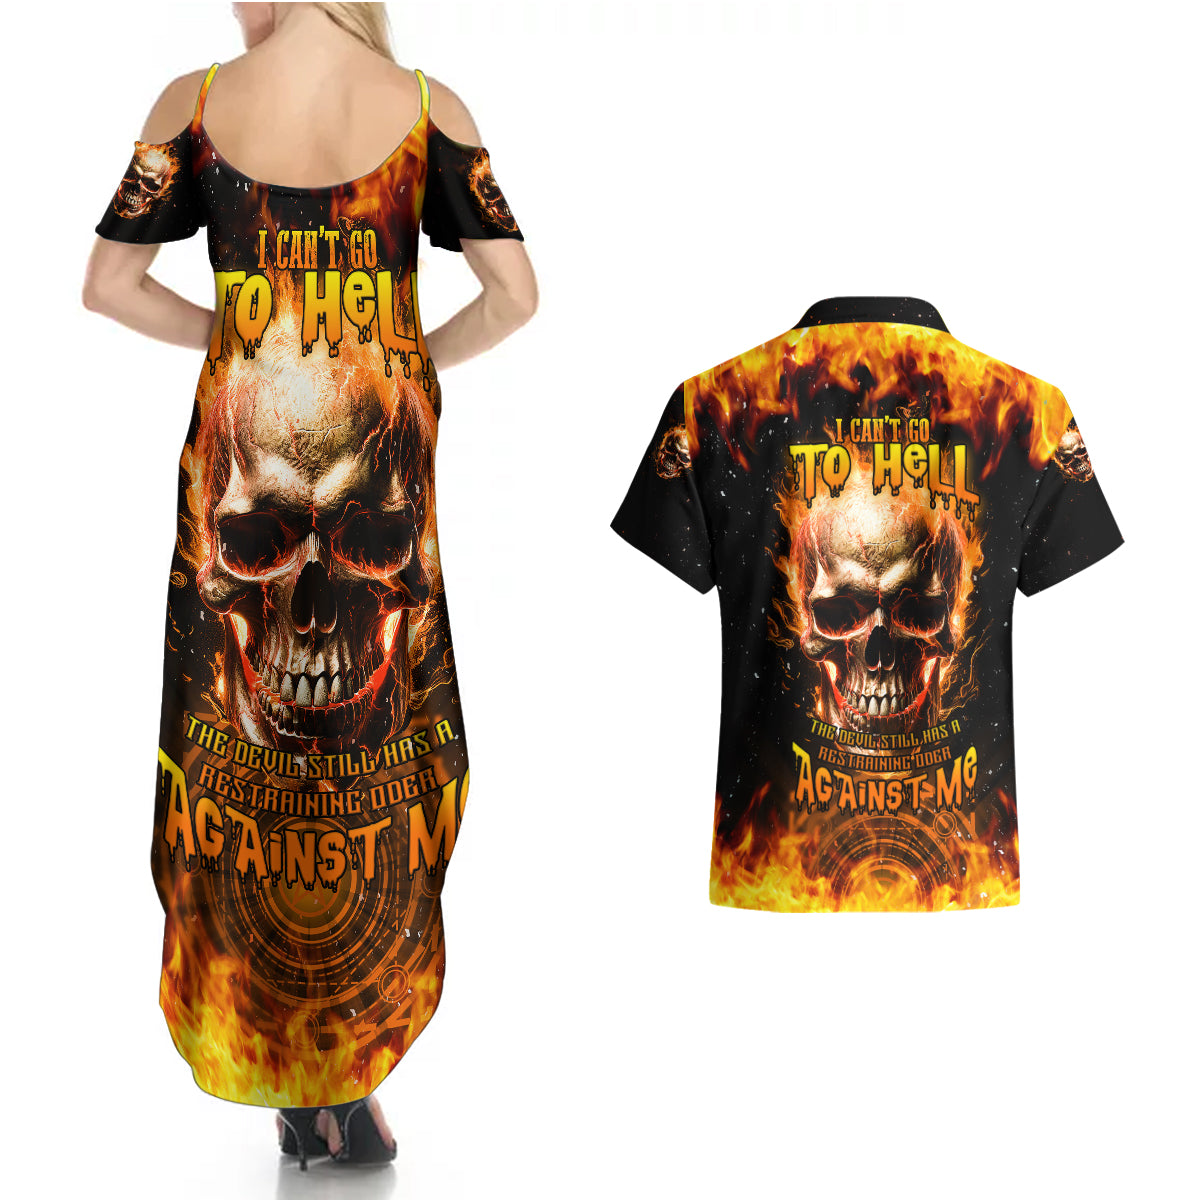 magic-fire-skull-couples-matching-summer-maxi-dress-and-hawaiian-shirt-i-cant-go-to-hell-the-devil-still-has-a-rest-training-oder-against-me